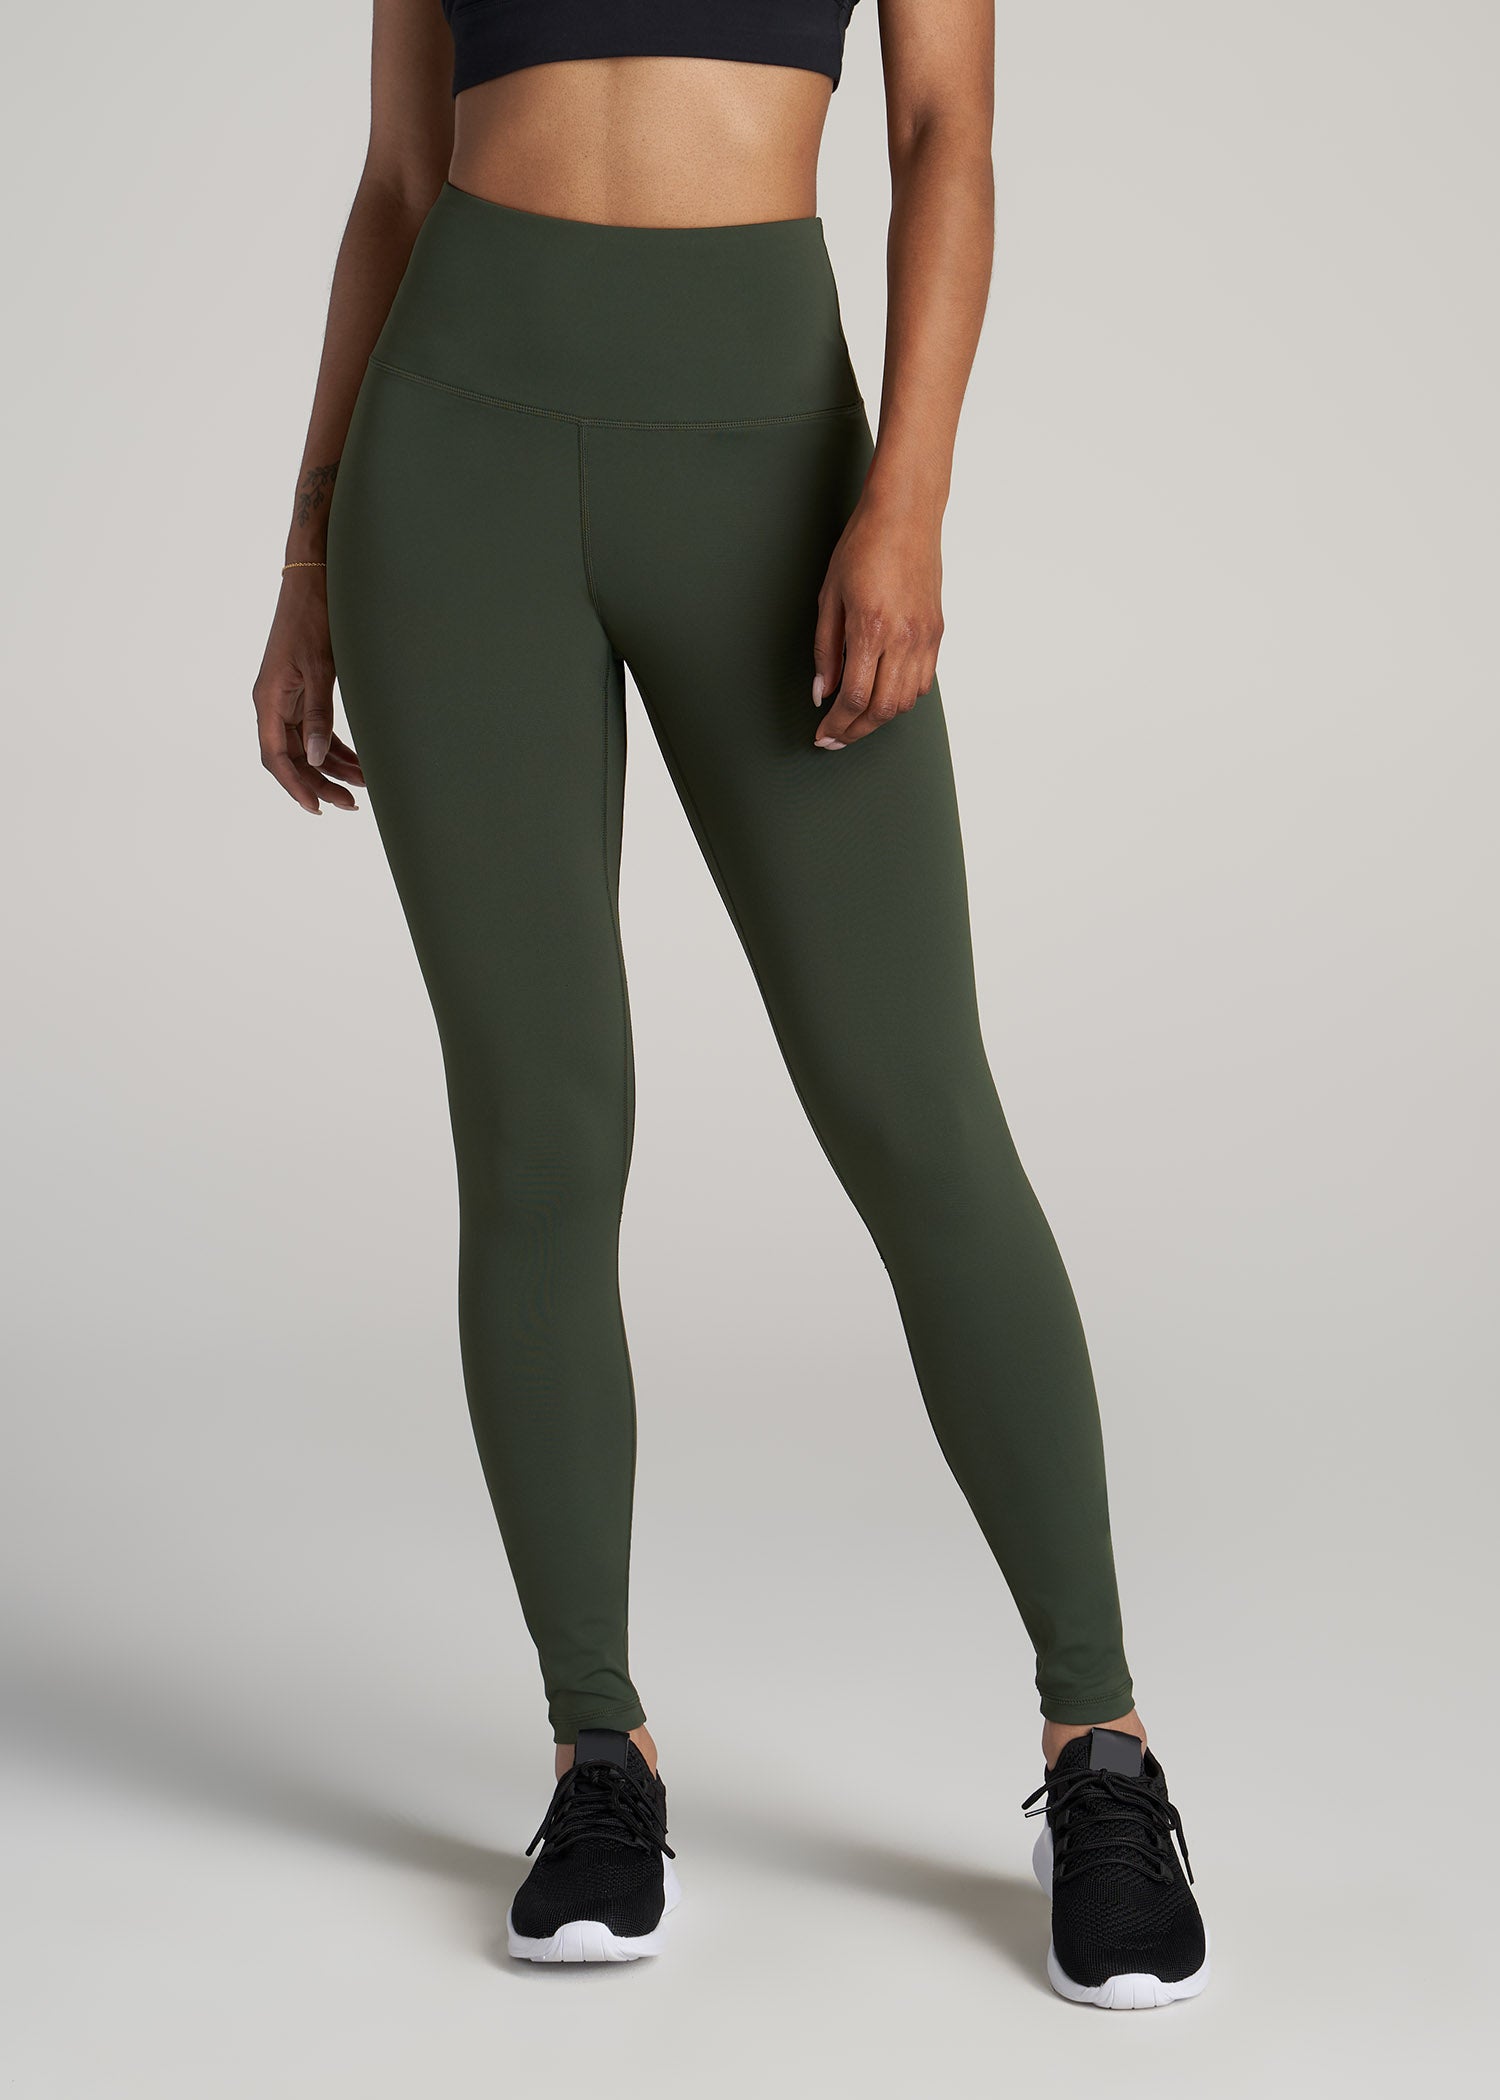 AT Balance High-Rise Leggings for Tall Women in Pine Tree